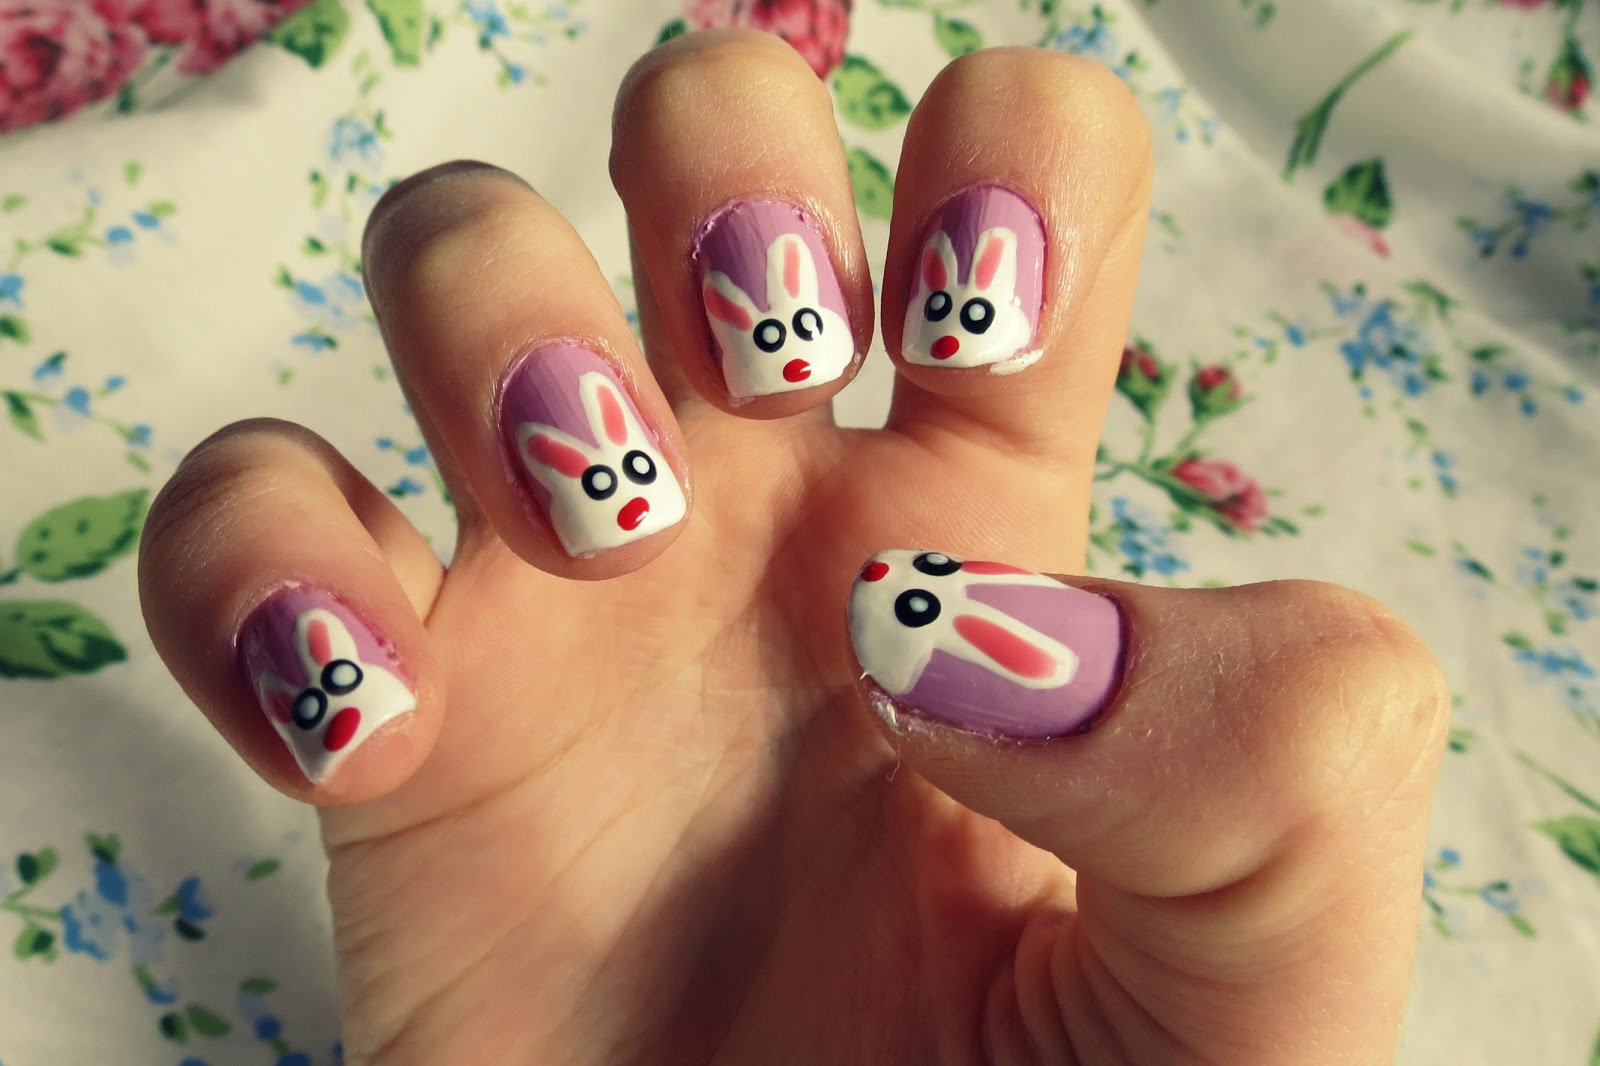 3. Easter Bunny Nail Art - wide 5